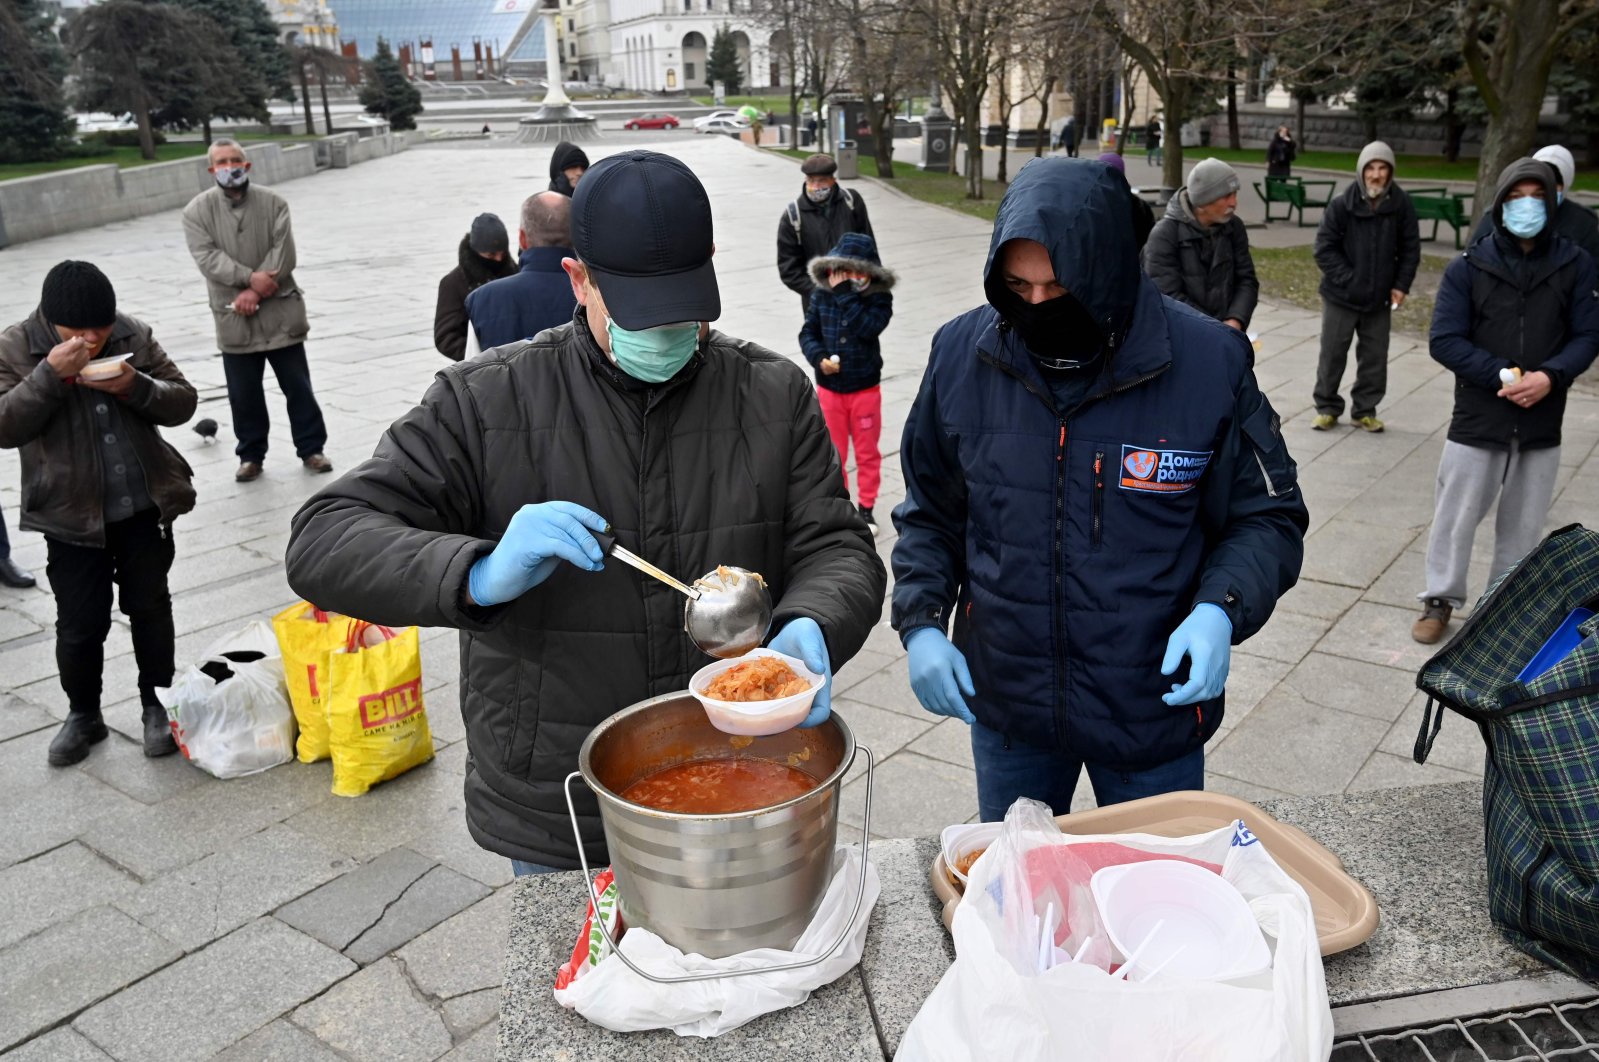 Homeless and vulnerable people some wearing face masks, amid concerns over the spread of the novel coronavirus, COVID-19, keep distance from each other as they queue to receive free meals being distributed by charity activists at Independence Square in the capital Kyiv on April 1, 2020. (AFP Photo)